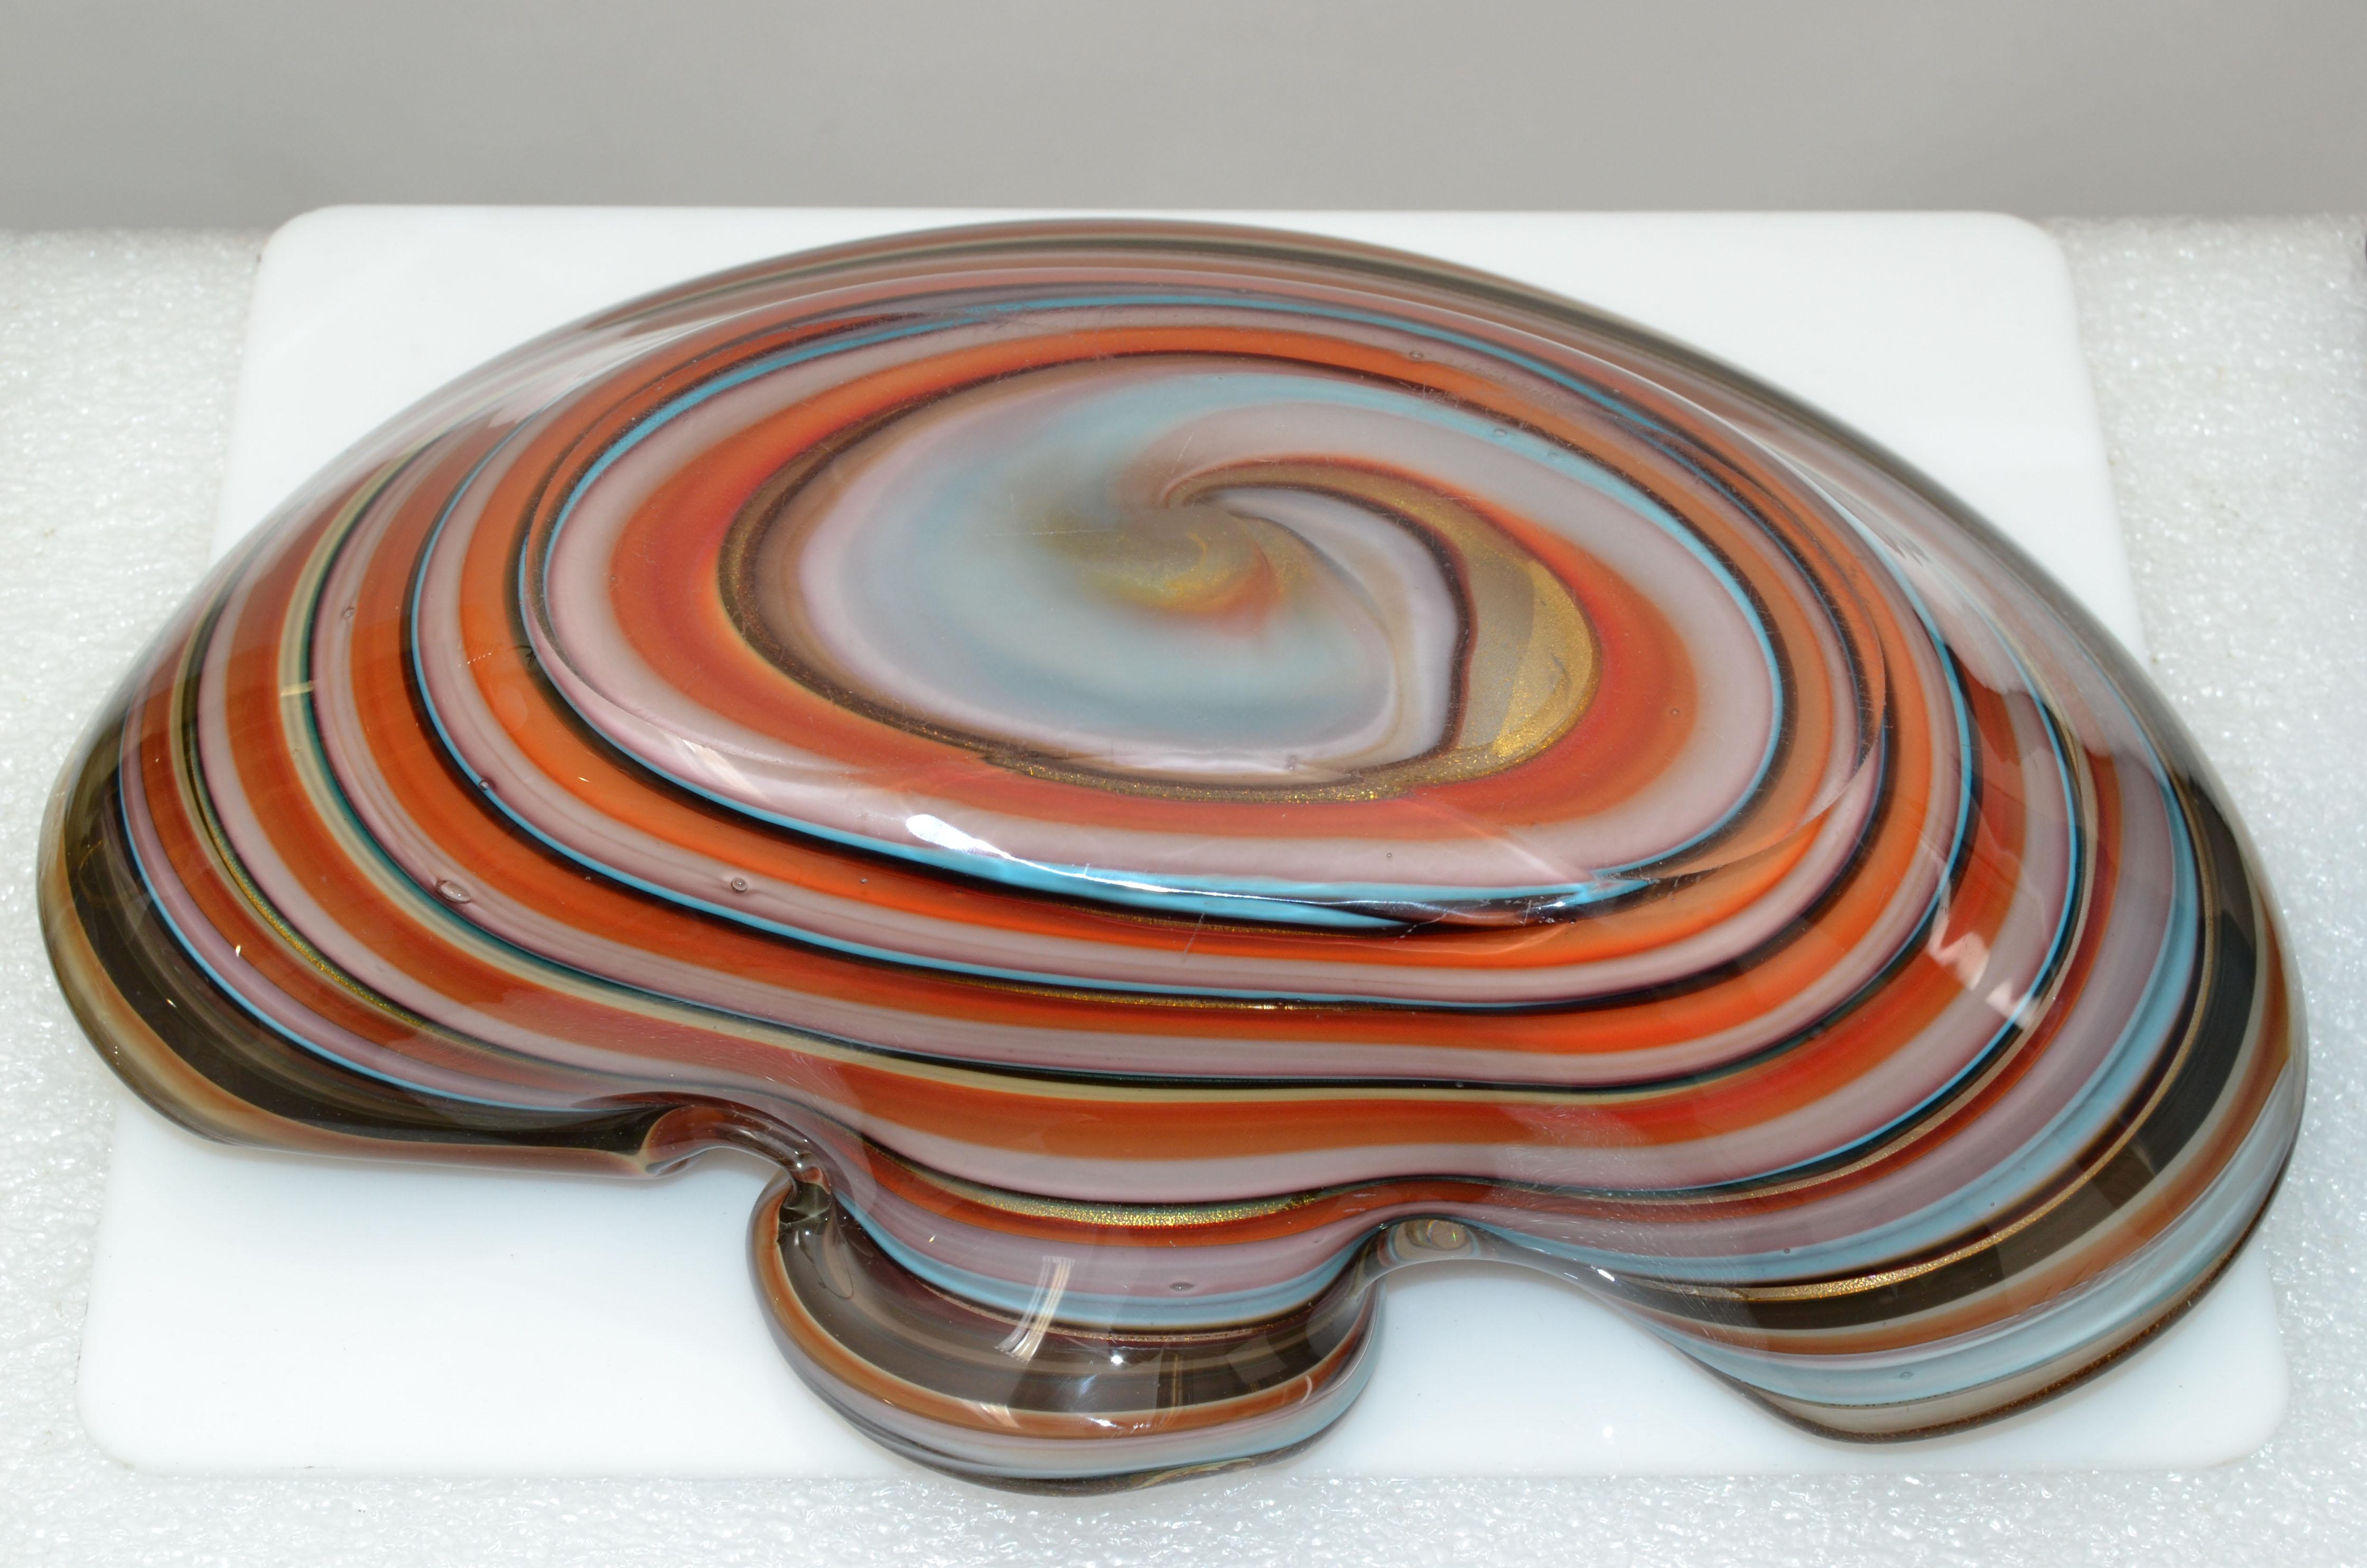 Large Finest Murano Glass Clam Shell Swirl Gold Dust Flecks Bowl, Catchall Italy For Sale 1